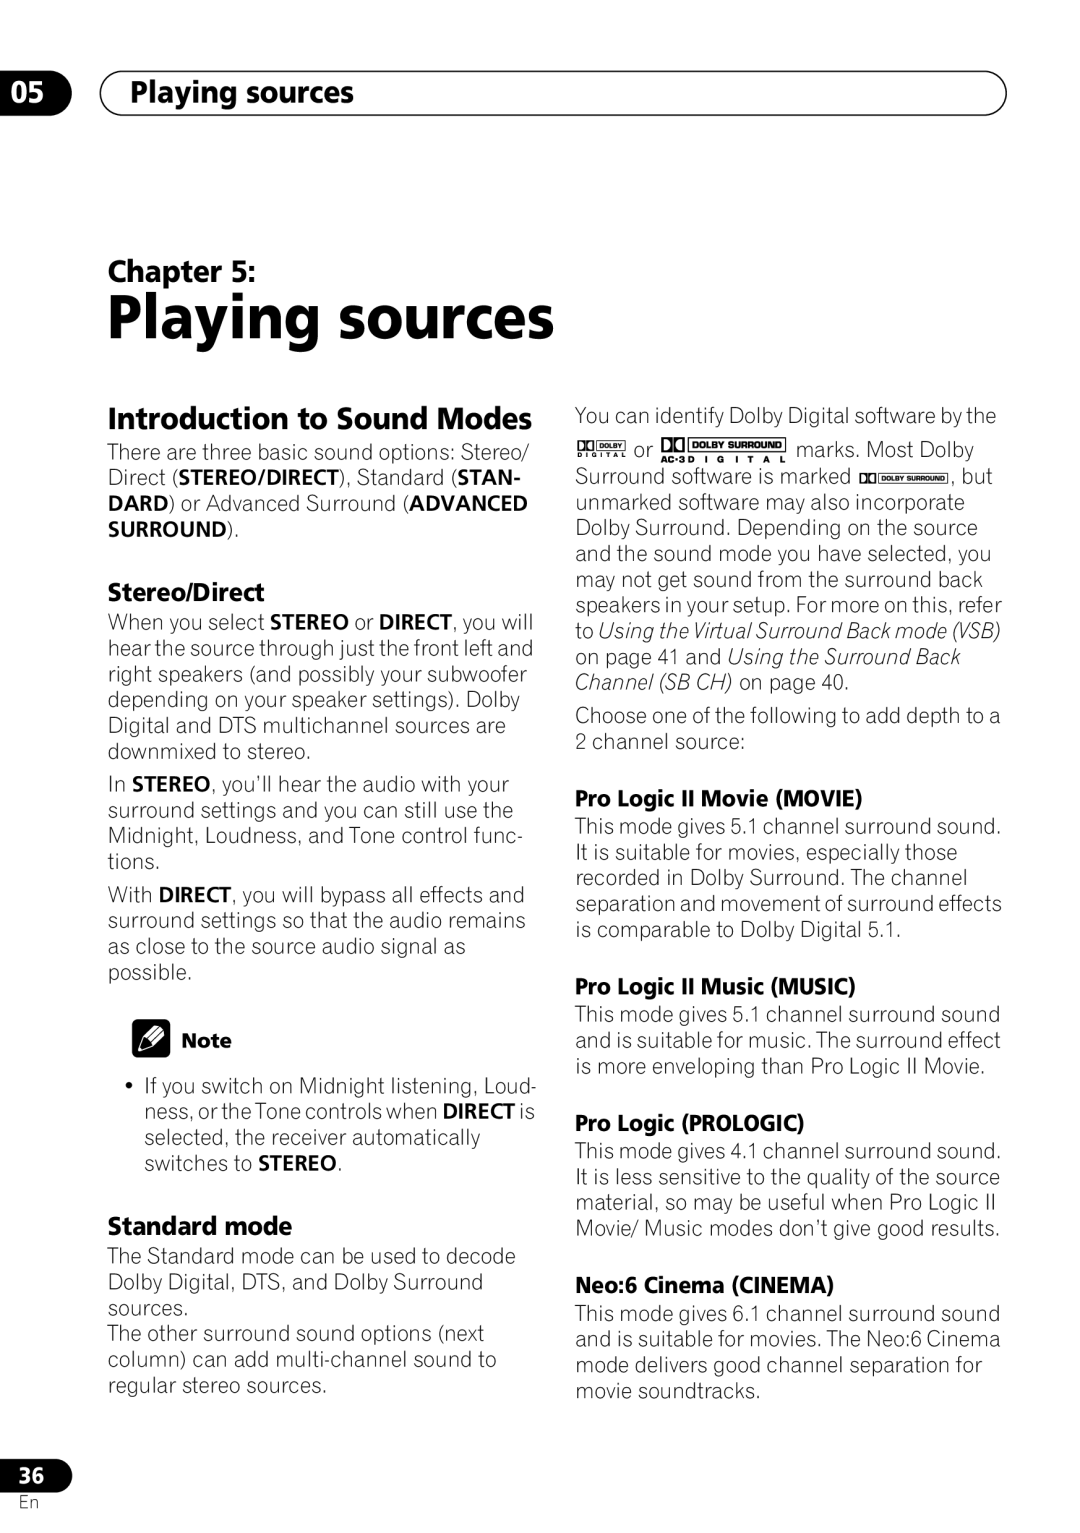 Pioneer VSX-D712 manual 05Playing sources Chapter, Introduction to Sound Modes, Stereo/Direct, Standard mode 